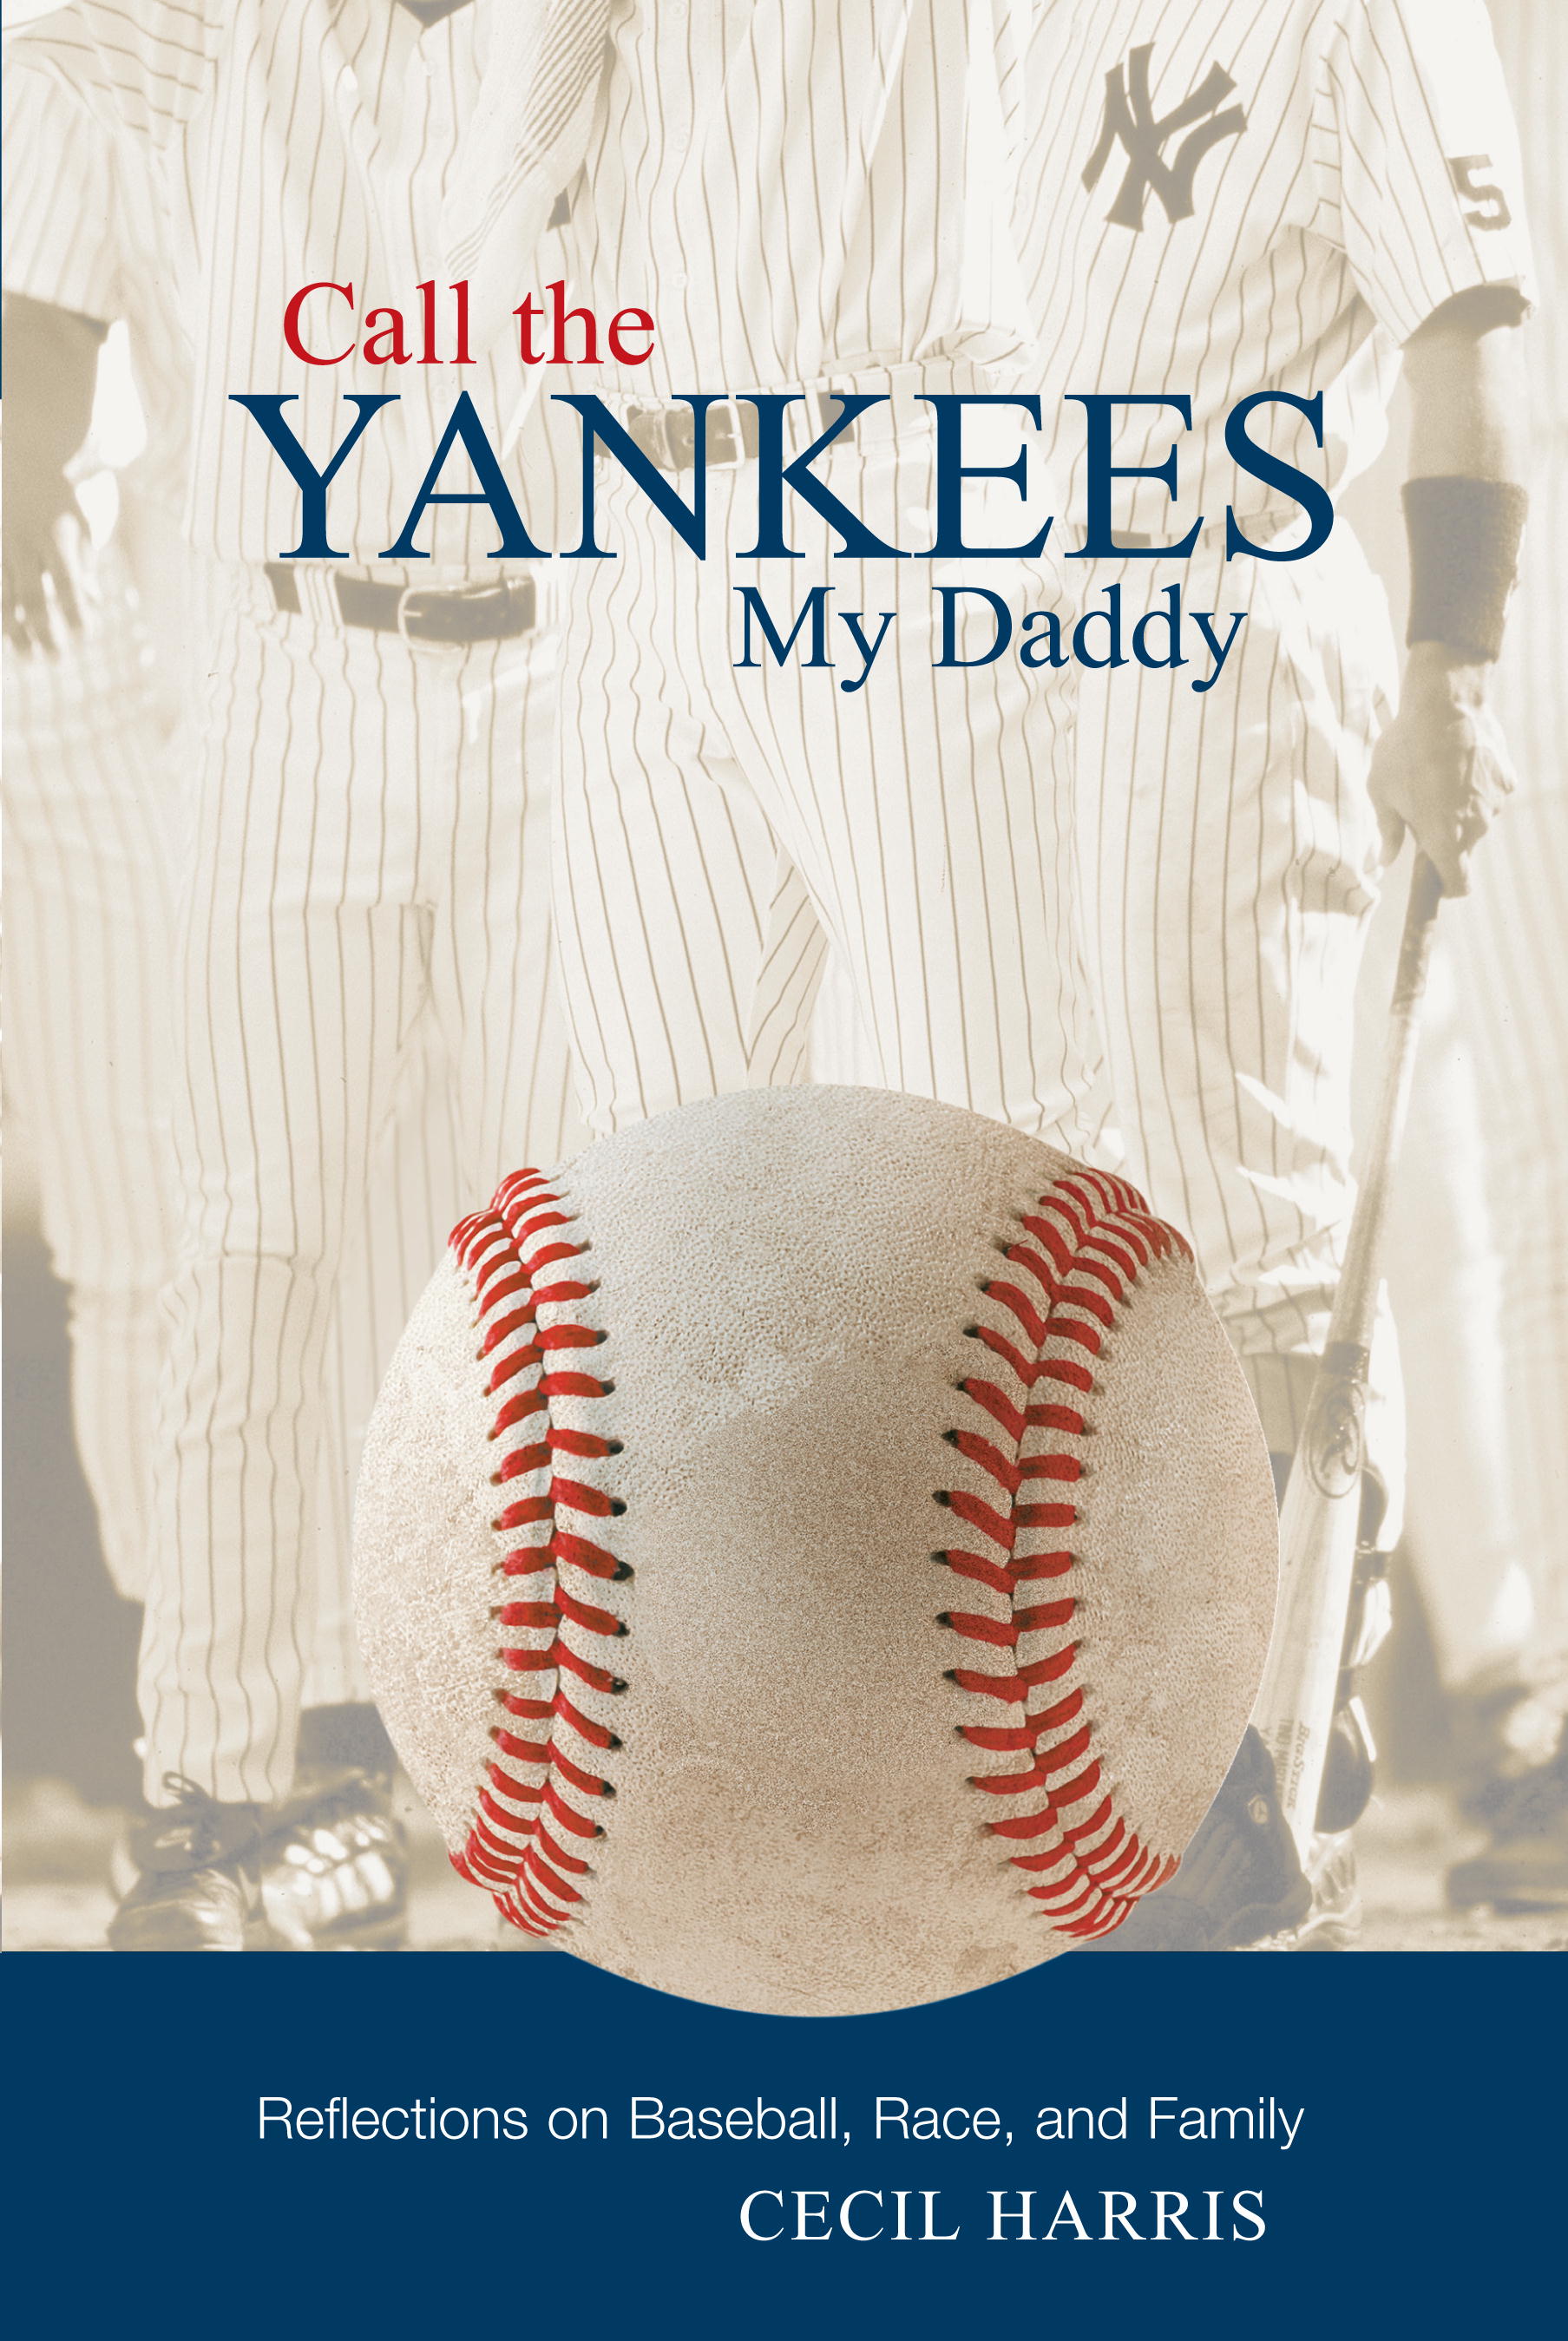 whos your daddy game yankees redsox